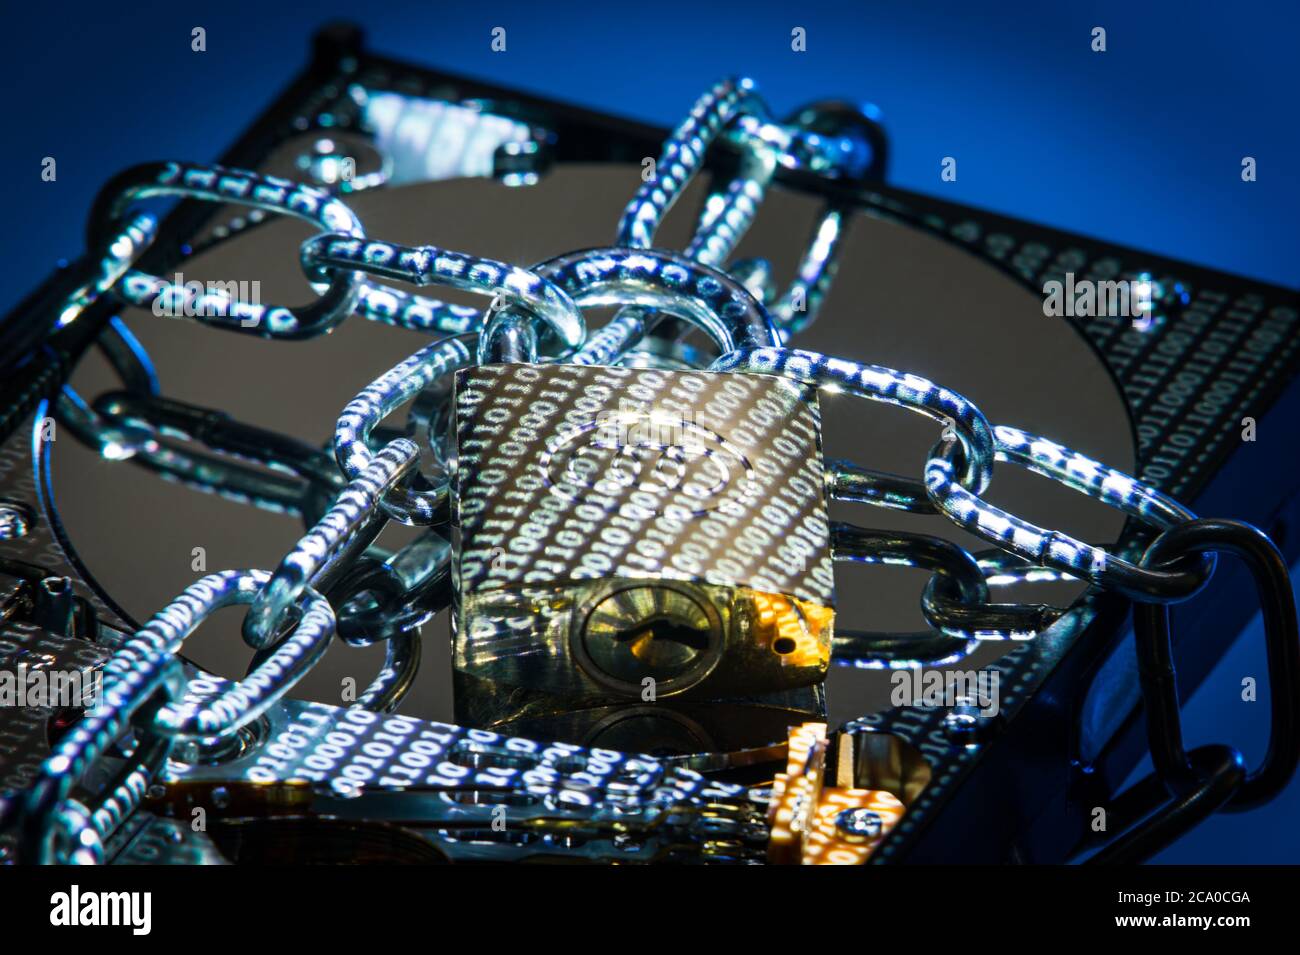 A hard disk drive (HDD) in padlocked chains with data projected on it. Stock Photo